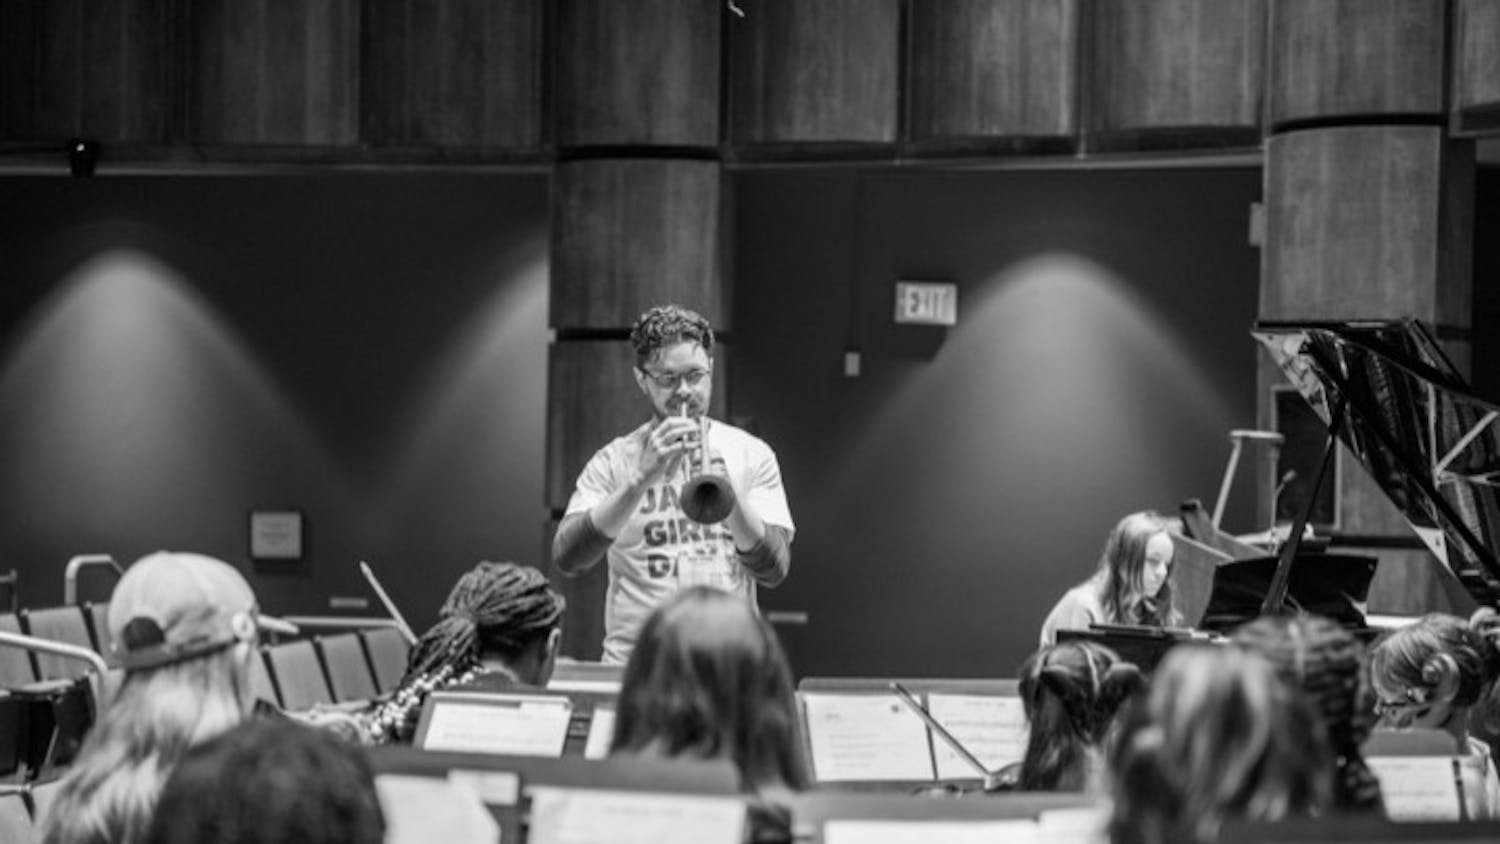 Associate professor of jazz studies Dr. Matt White lets the music flow from his instrument during Jazz Girls Day on Jan. 14, 2023, at the University of South Carolina’s School of Music. The next Jazz Girls Day will be held on April 22, 2023, in Charleston, South Carolina.&nbsp;